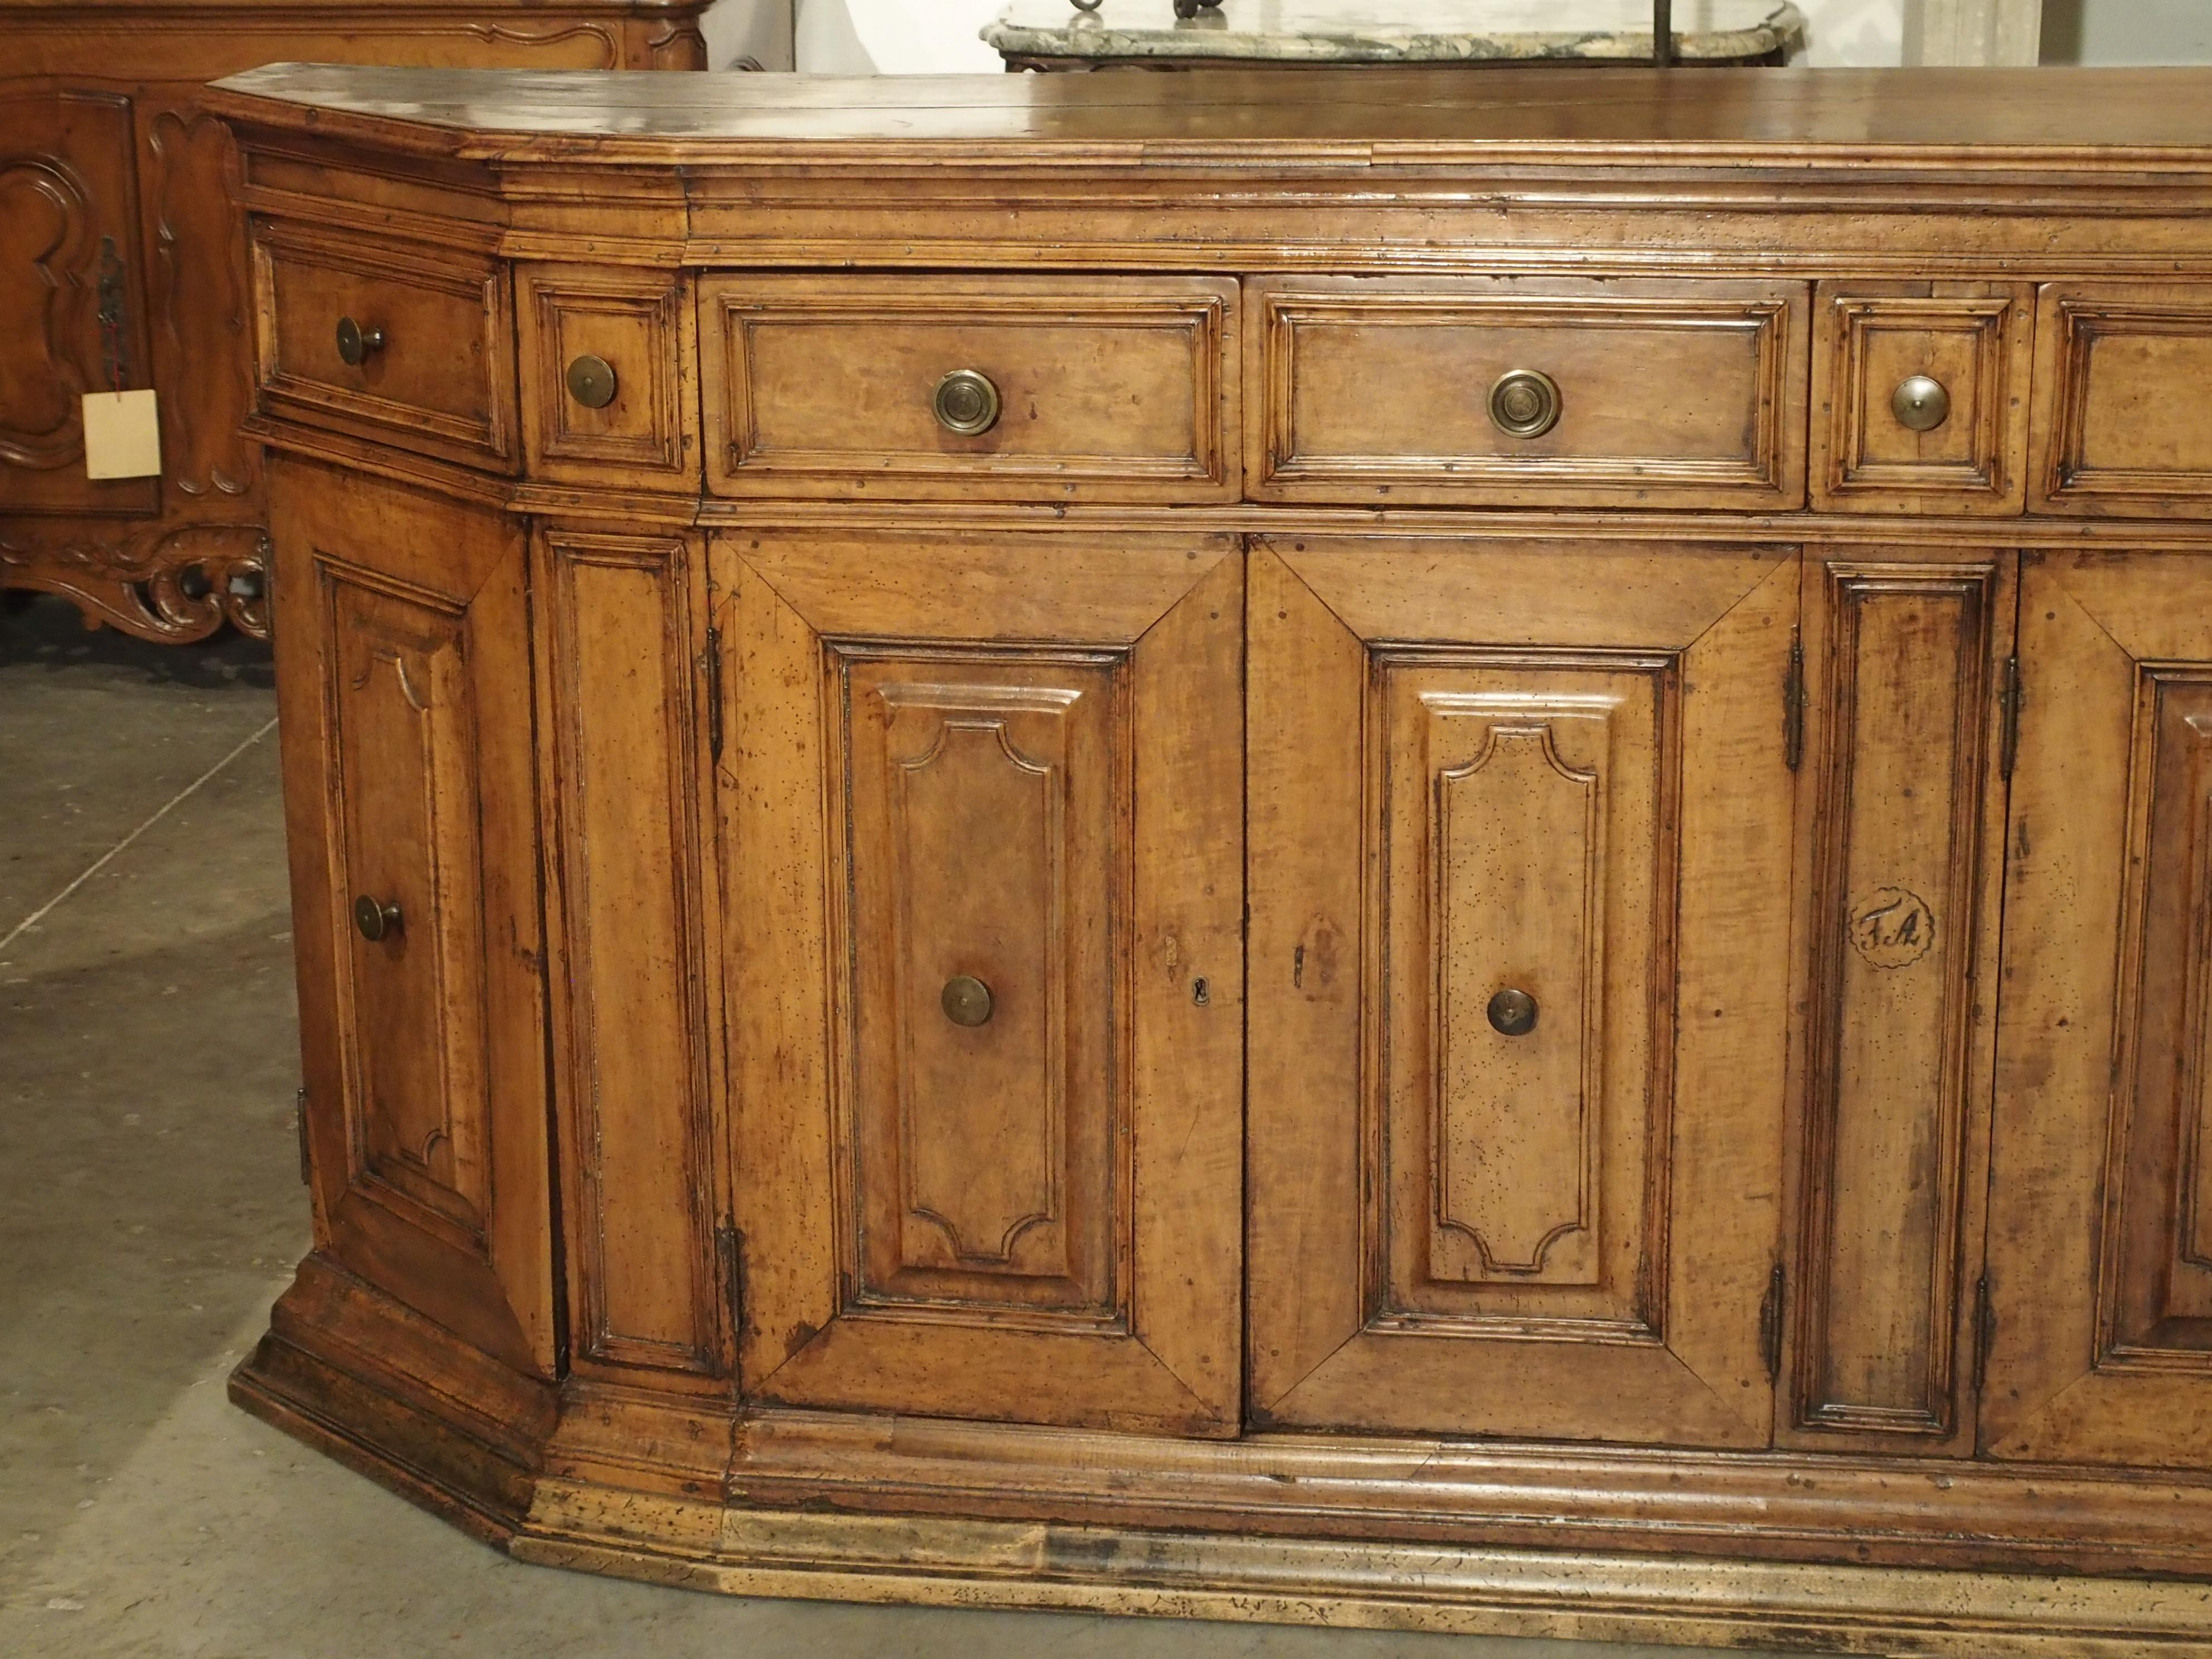 From Tuscany, Italy, this large and light colored walnut wood credenza dates to the 1600’s. The ornamentation on credenzas of this period in Italy was uncomplicated:

